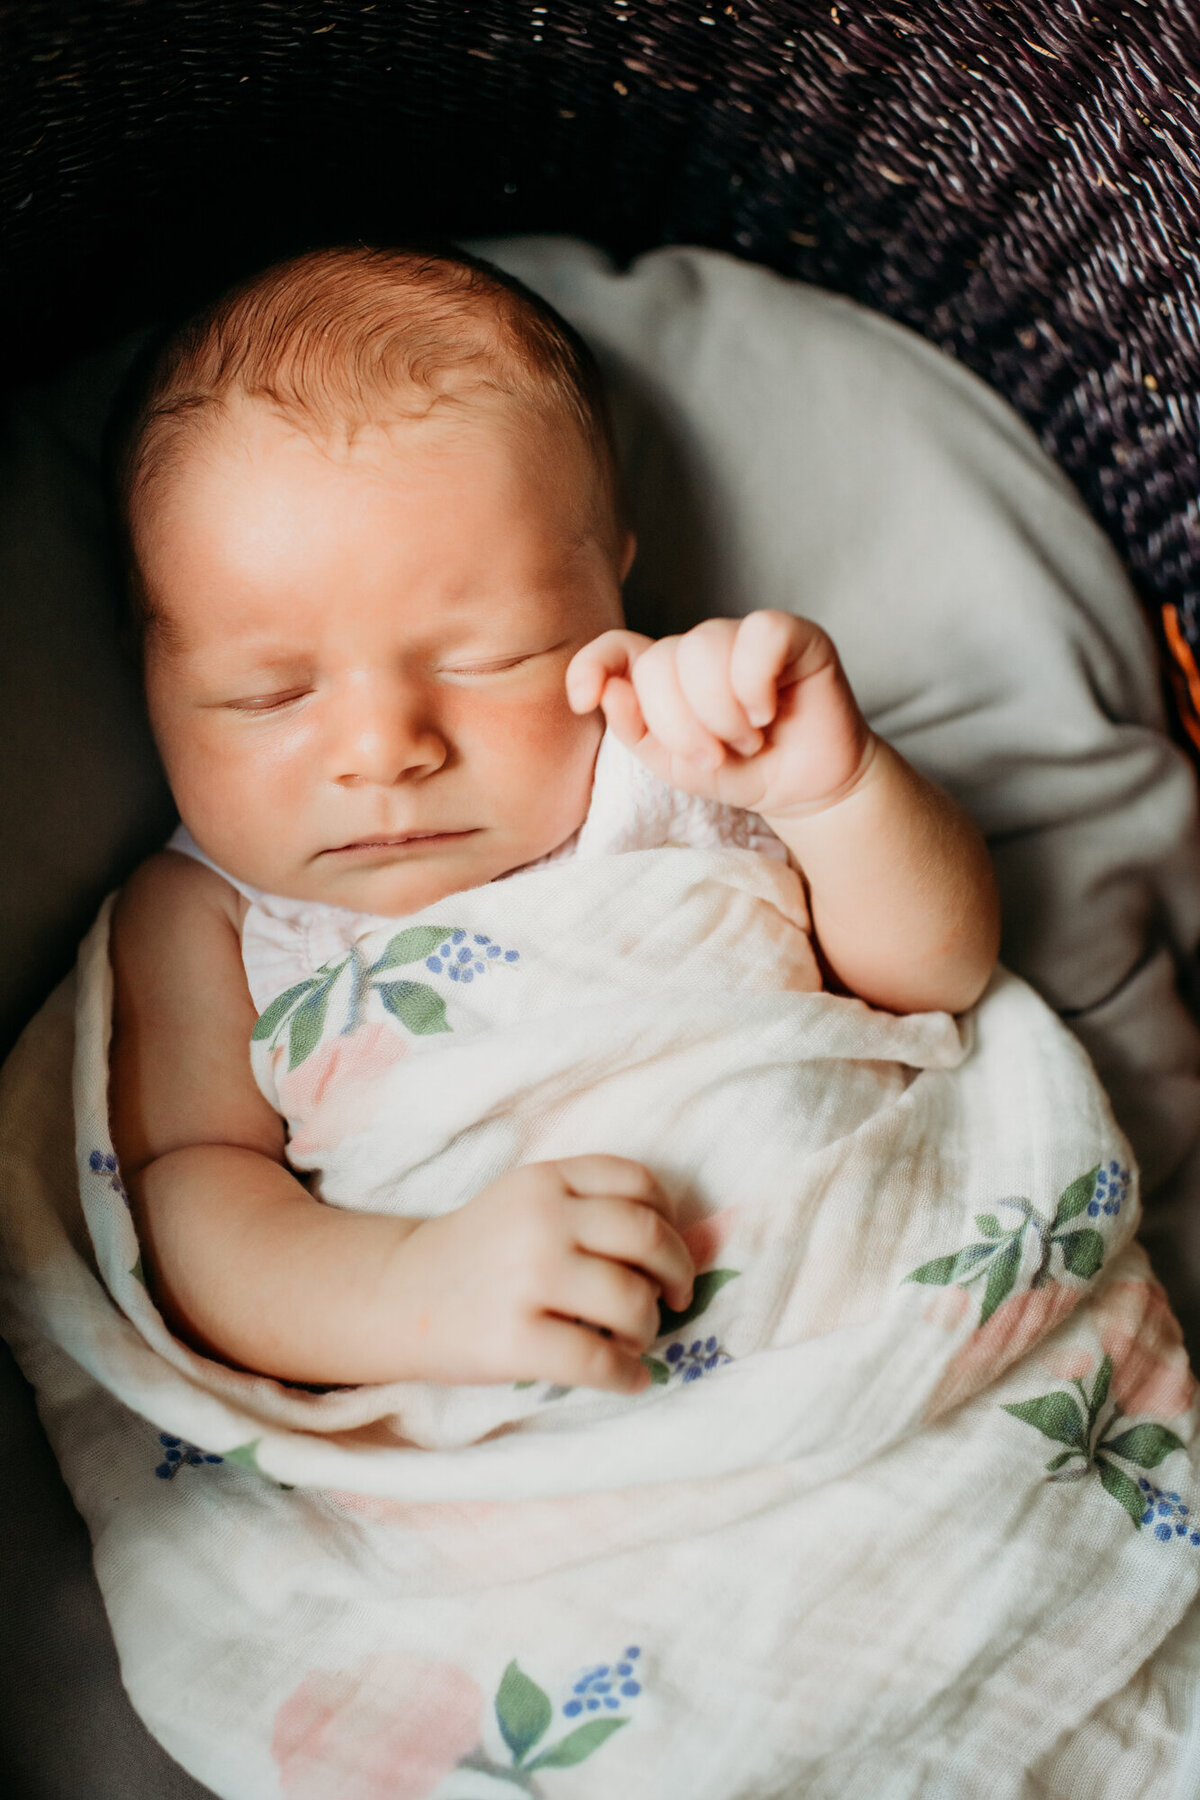 Newborn Photographer, Baby girl in a swaddle blanket with her arms out, asleep in a basket.